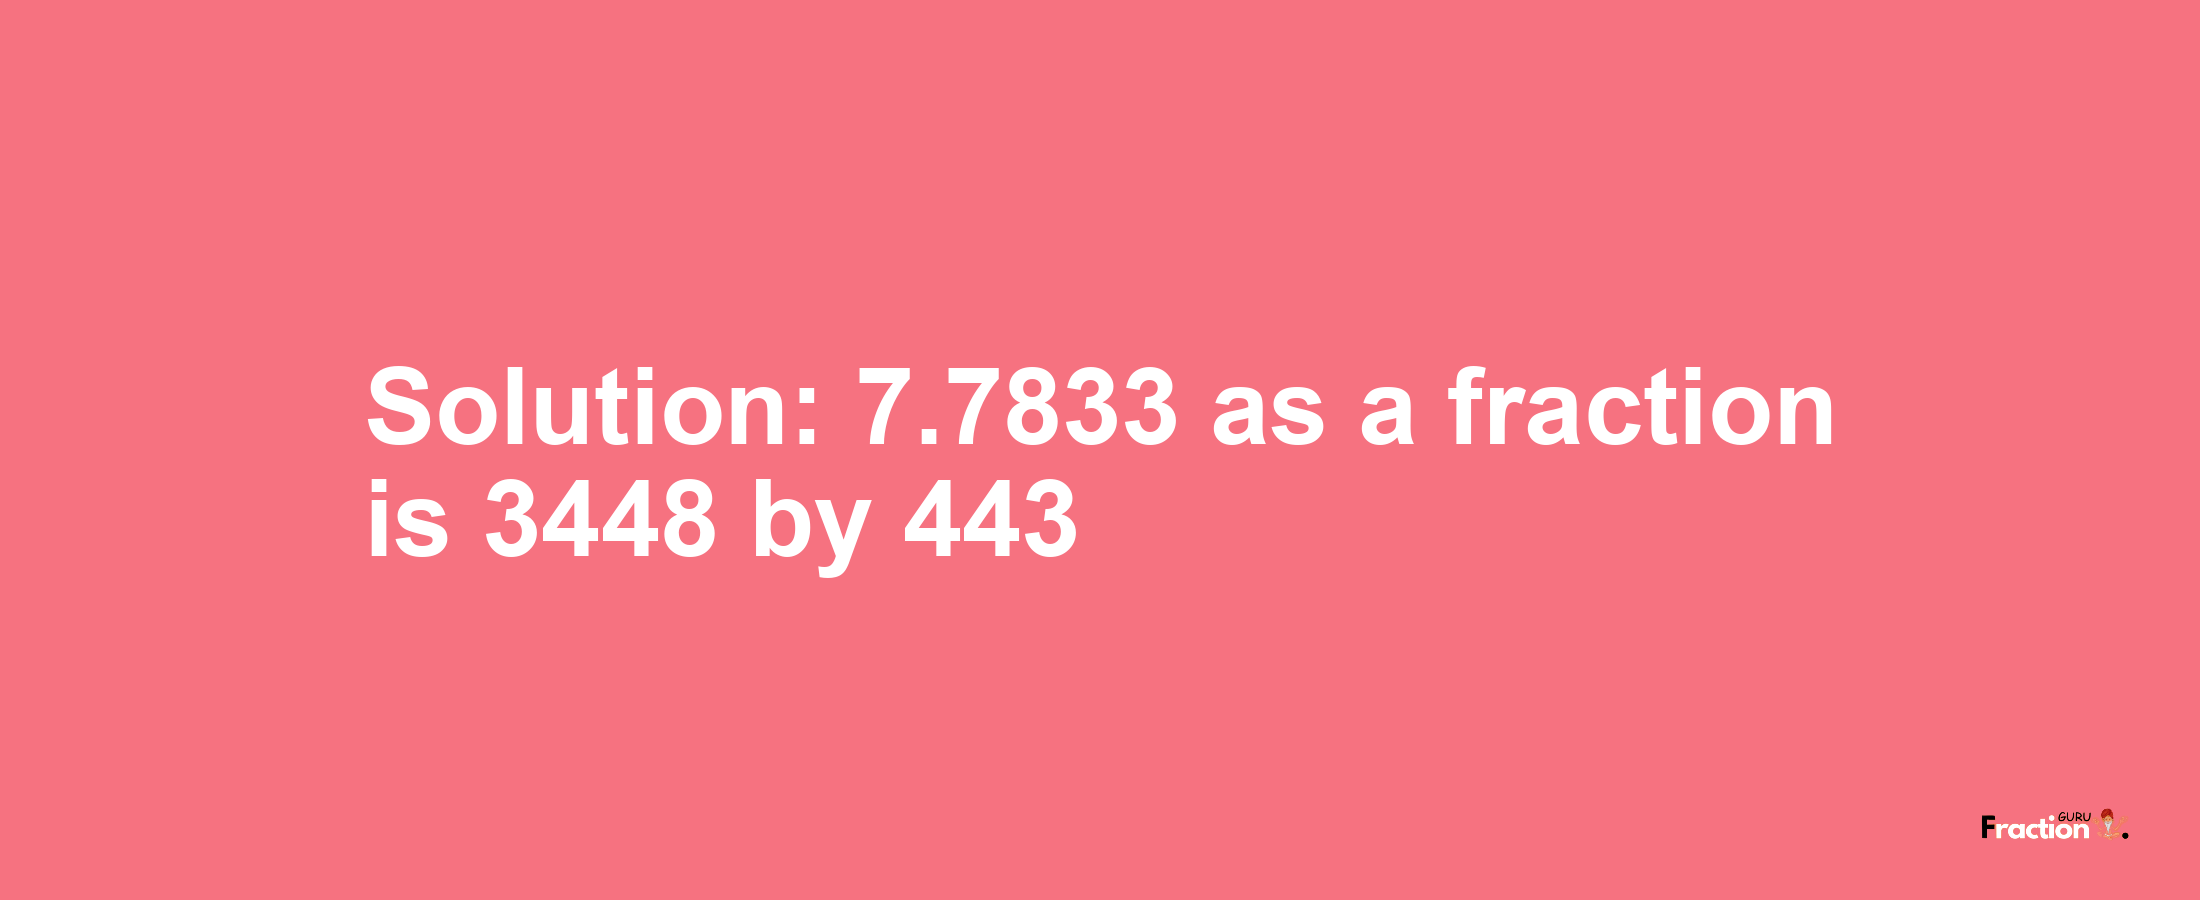 Solution:7.7833 as a fraction is 3448/443